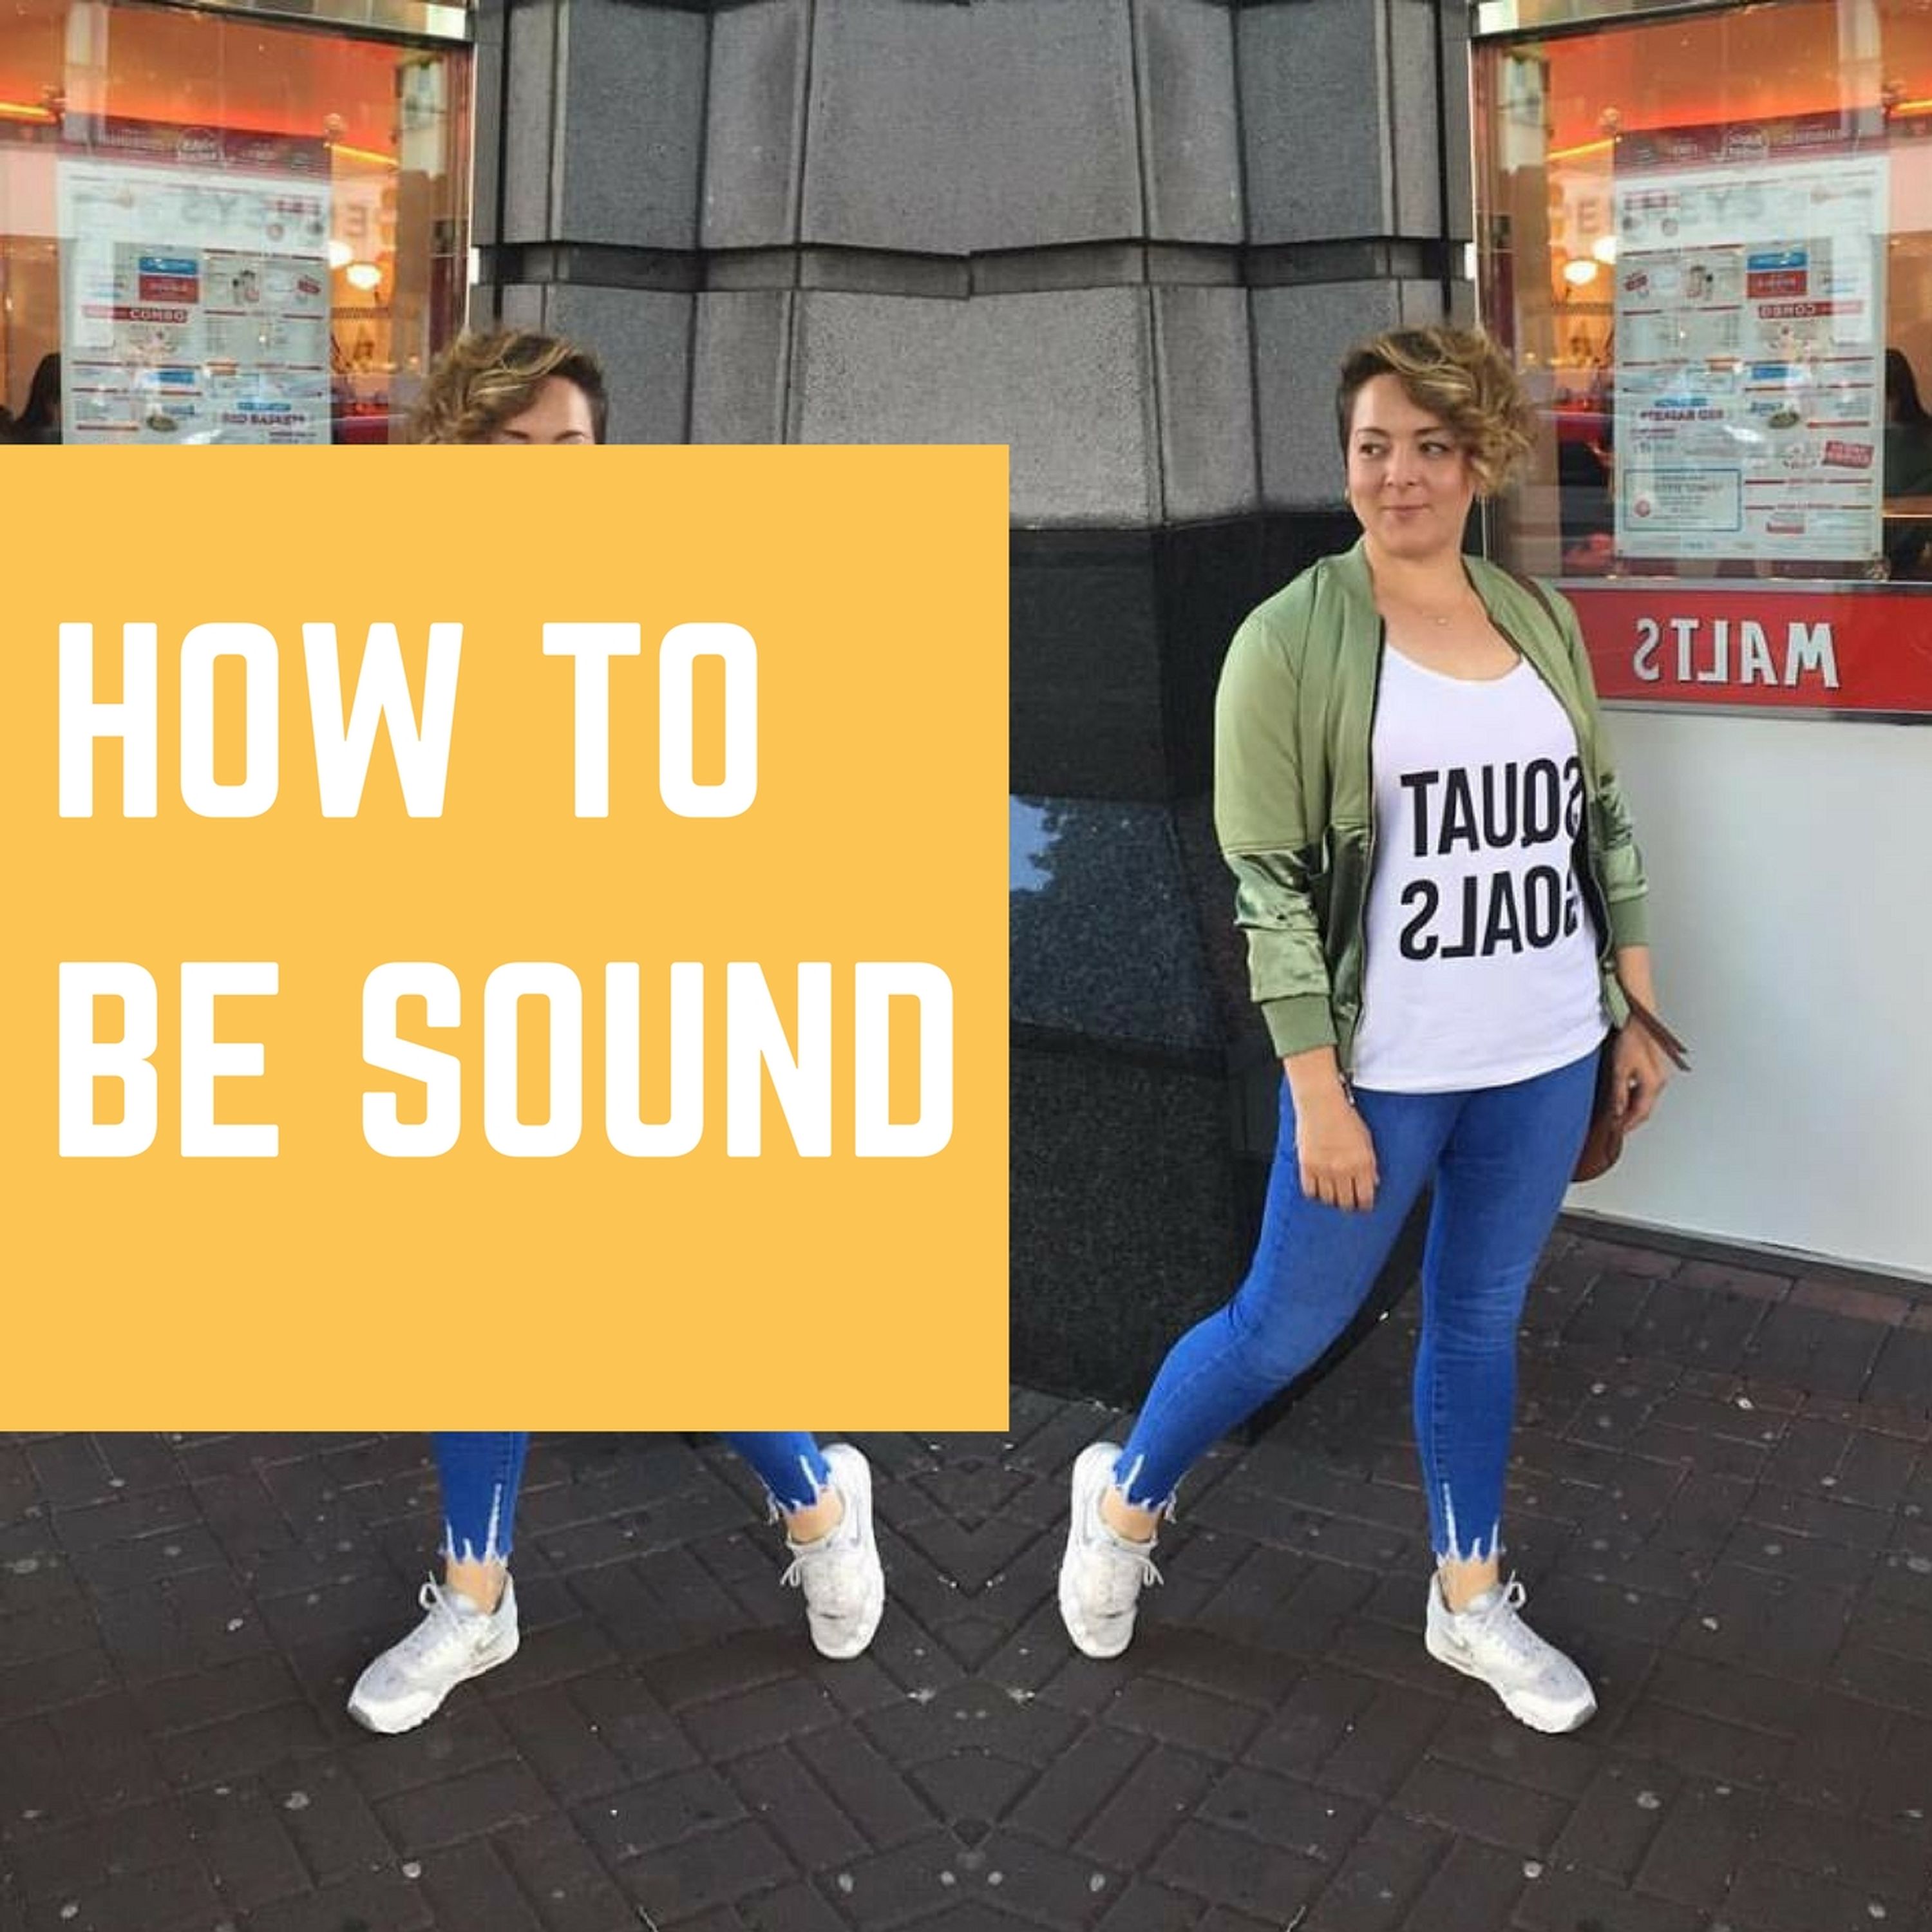 Helen Steele on how to be sound